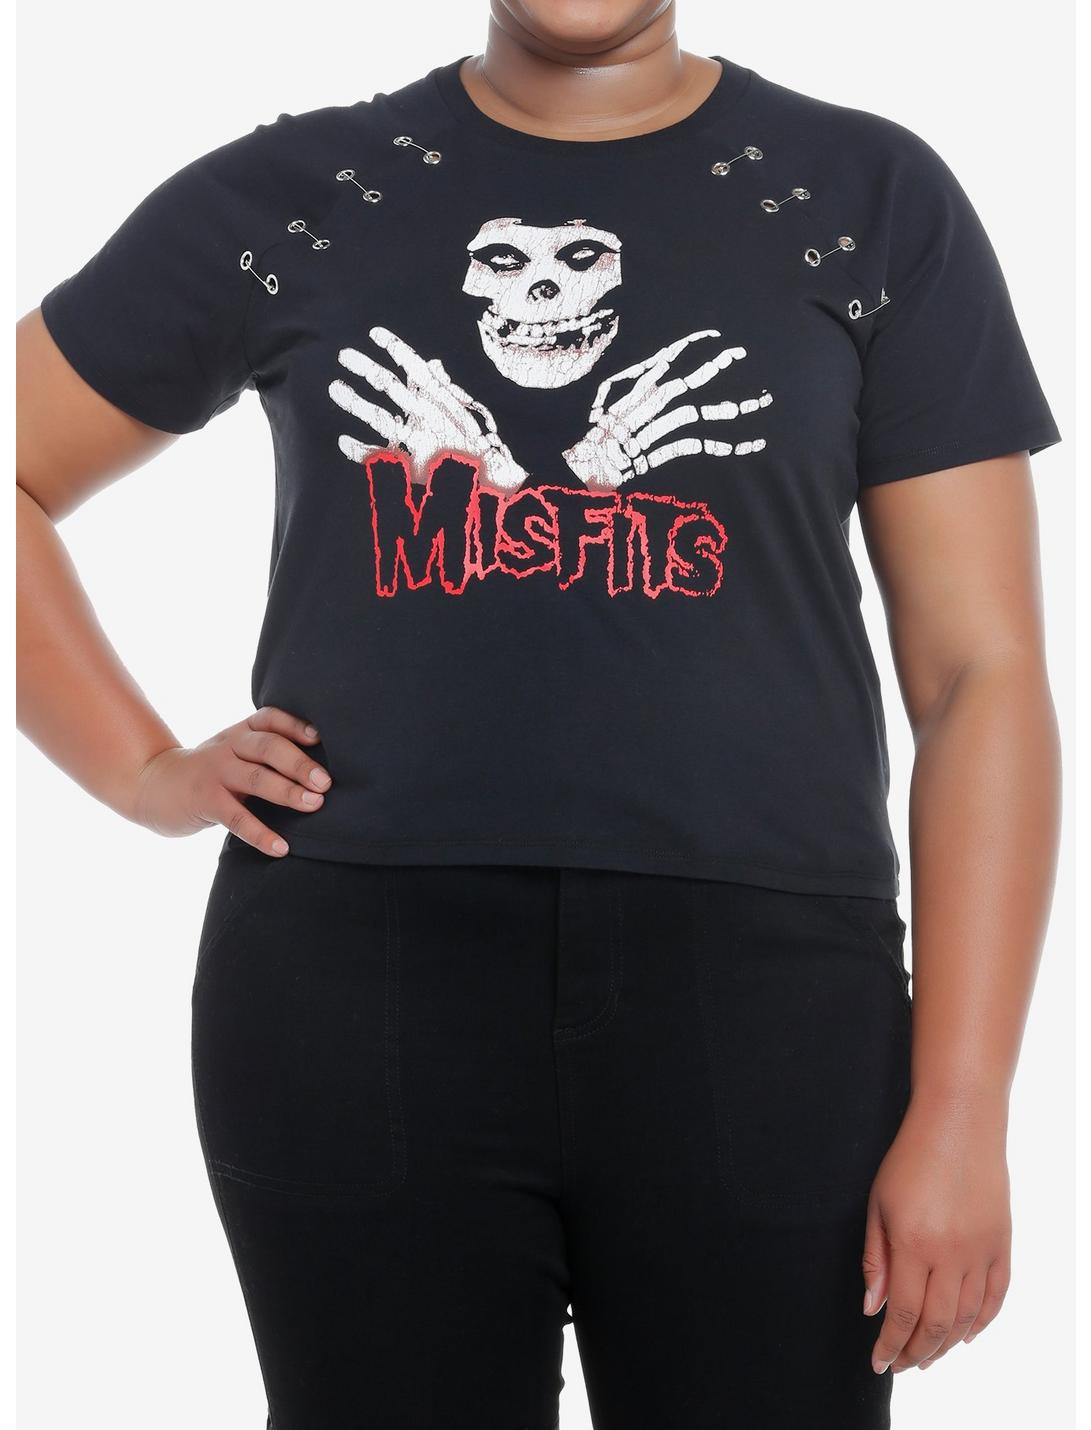 Misfits X Social Collision Fiend Safety Pin Girls Raglan T-Shirt Plus Size Hot Topic Exclusive, BLACK, hi-res